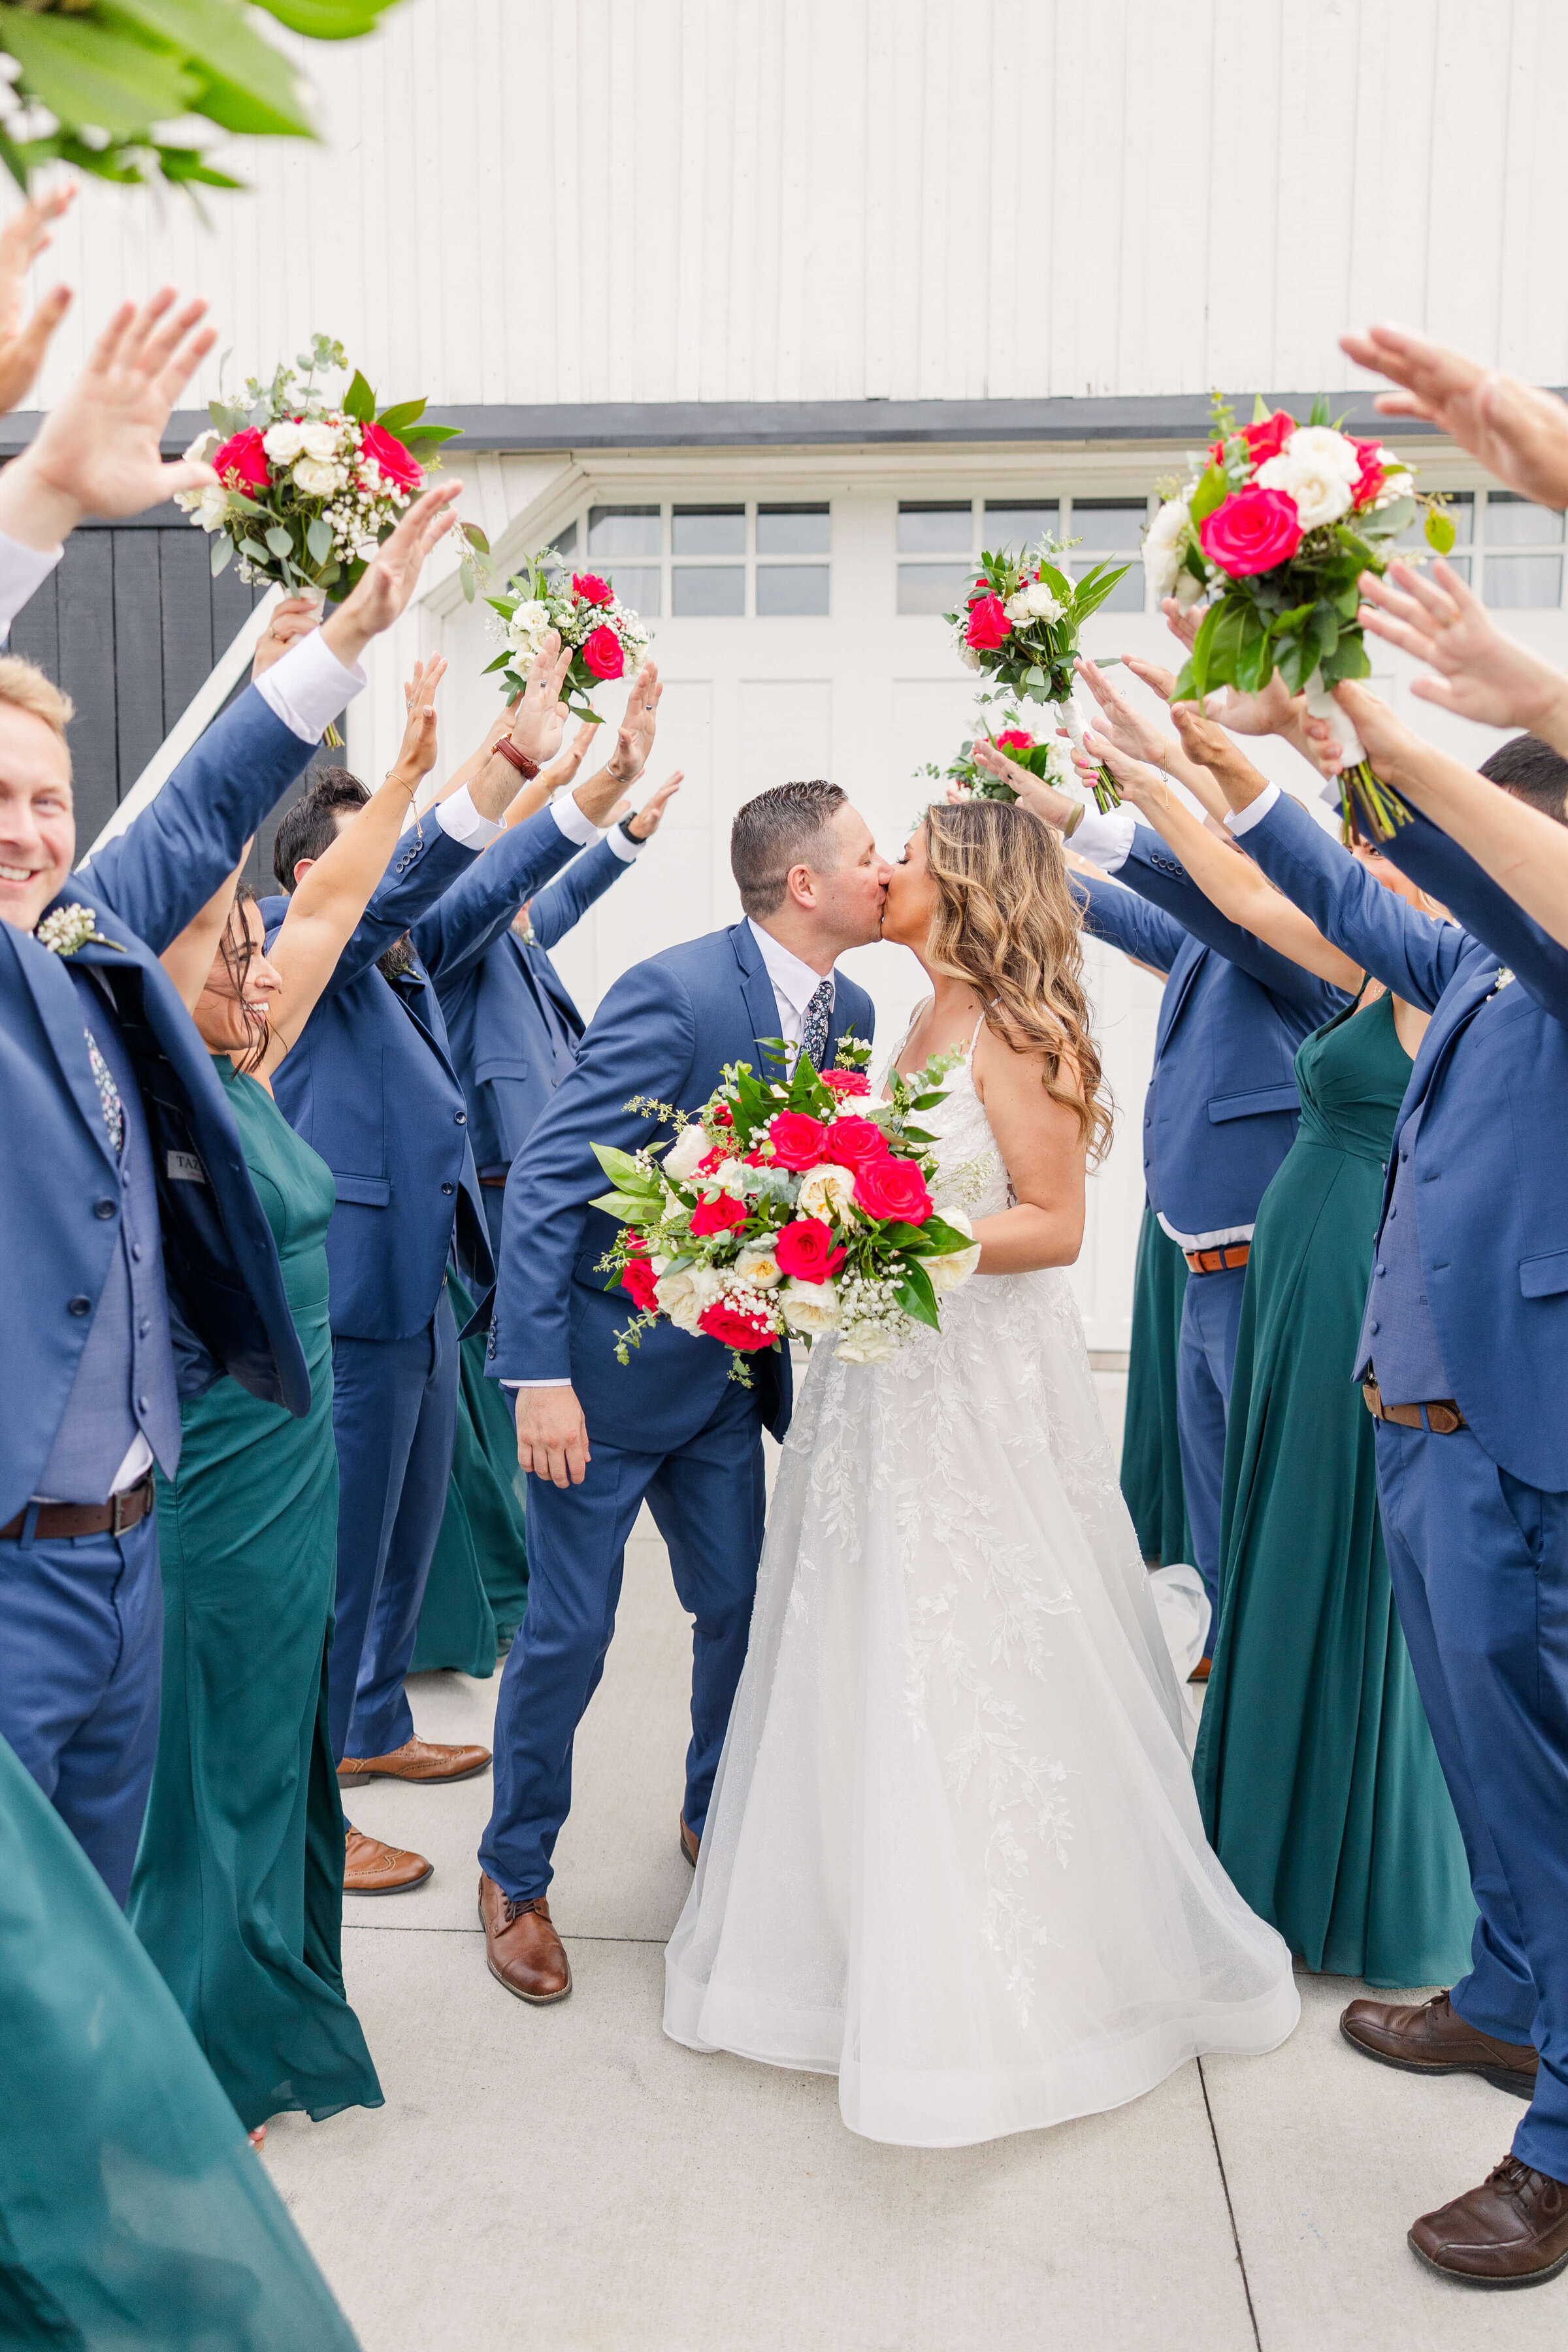 A bride and groom kiss as their bridal party cheers for them. The groomsmen are in blue suits and the bridesmaids are in teal dresses.